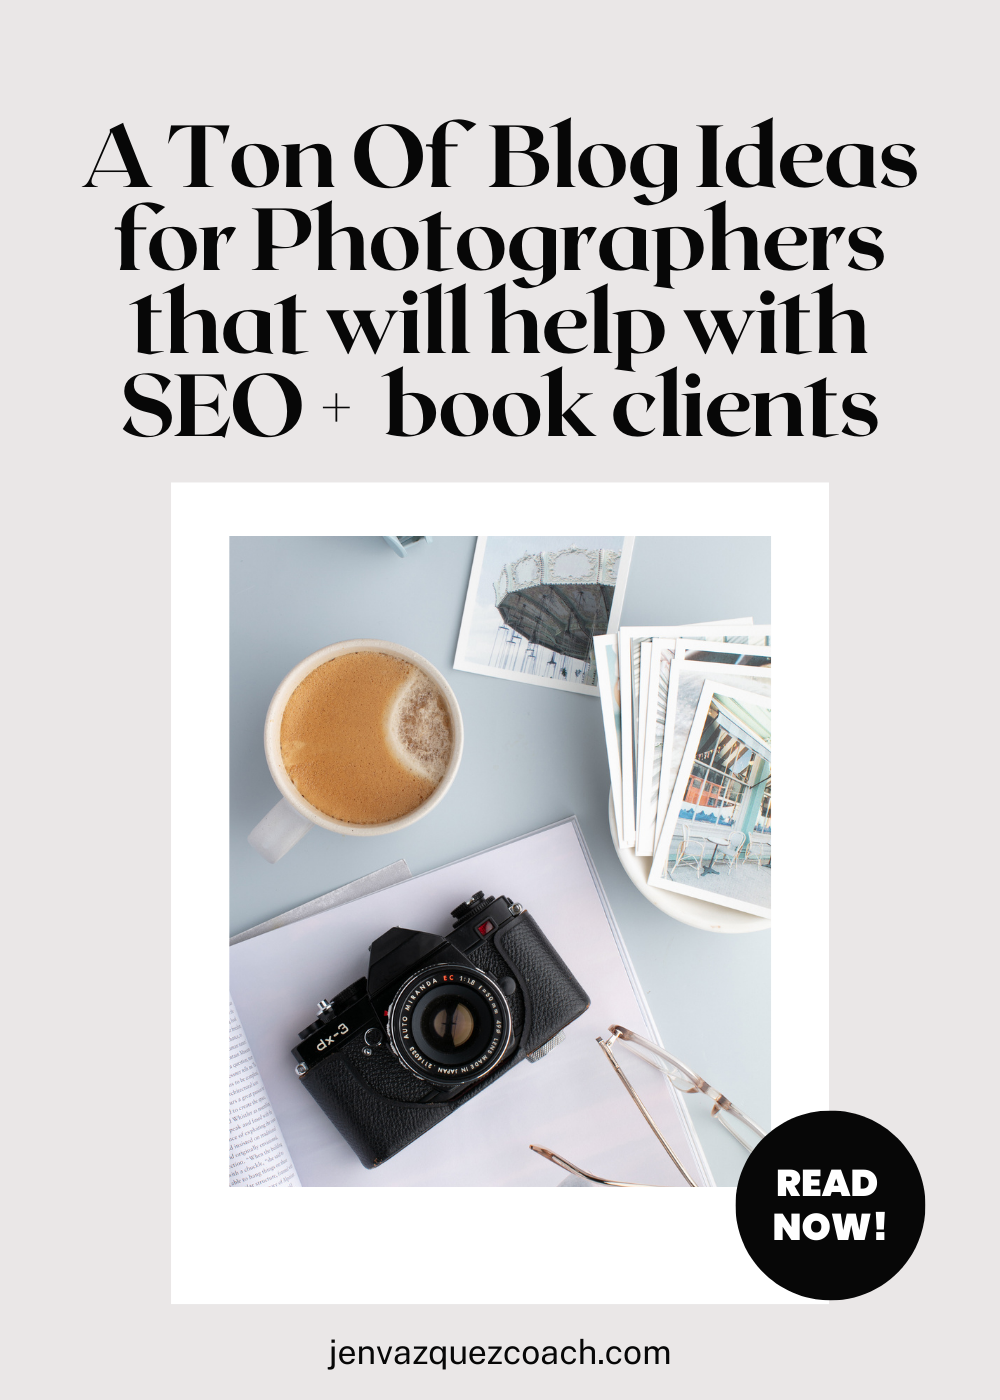 Blog Ideas for Photographers that will help with SEO and book clients<br />
